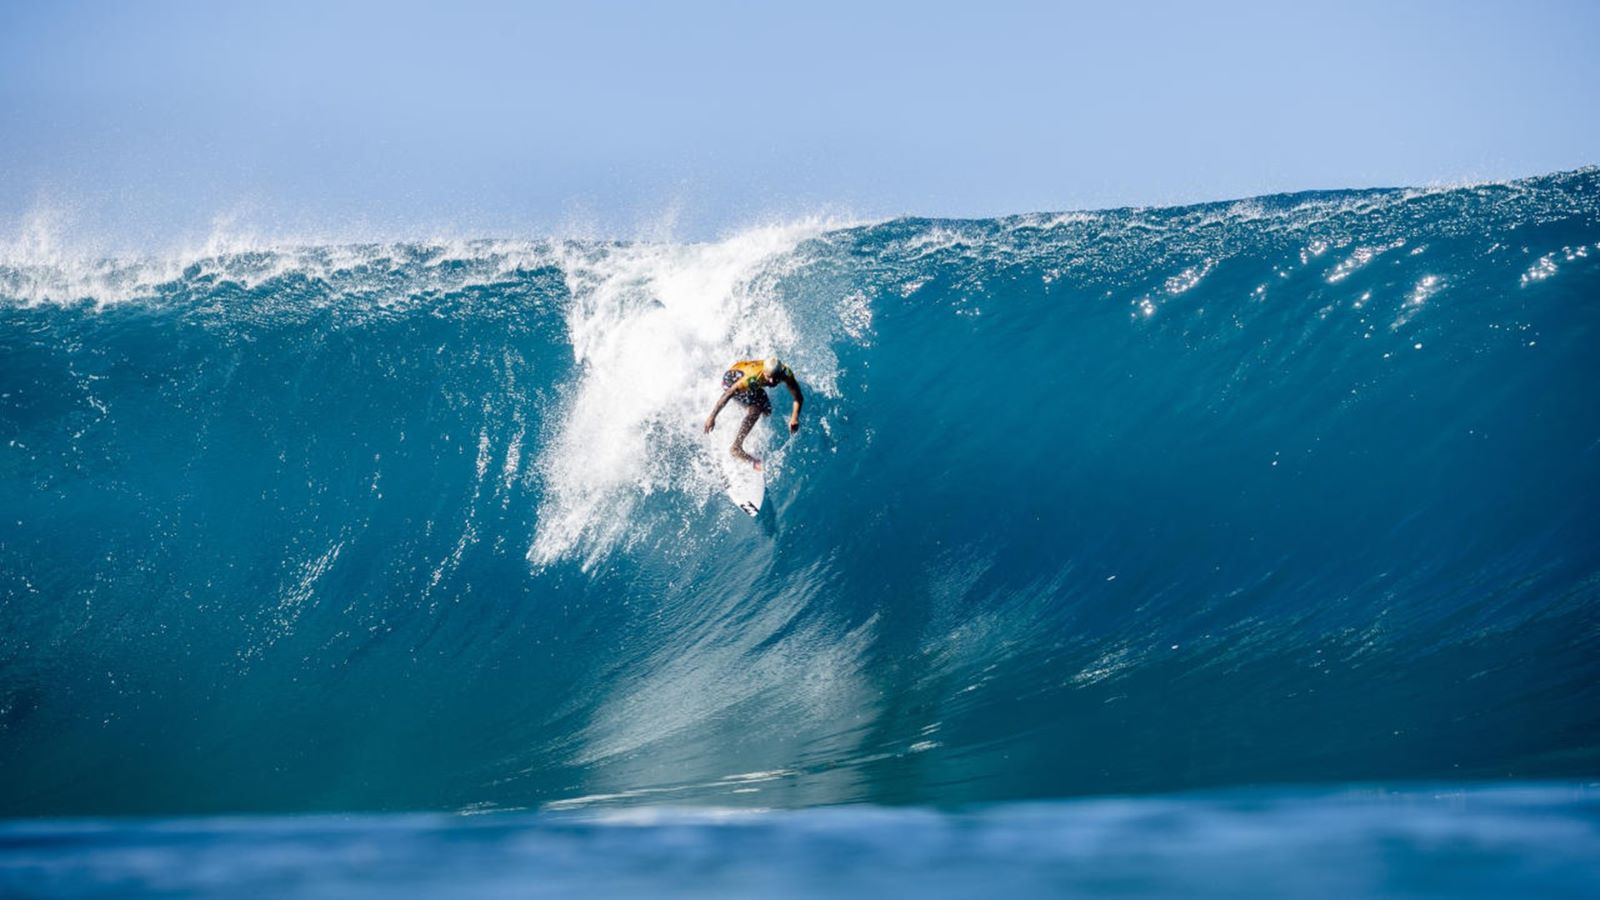 The men's 2021 season fronted by World Champ Italo Ferreira is set to kick off December 8th with the Billabong Pipe Masters presented by Hydro Flask. Photo credit WSL  KELLY CESTARI